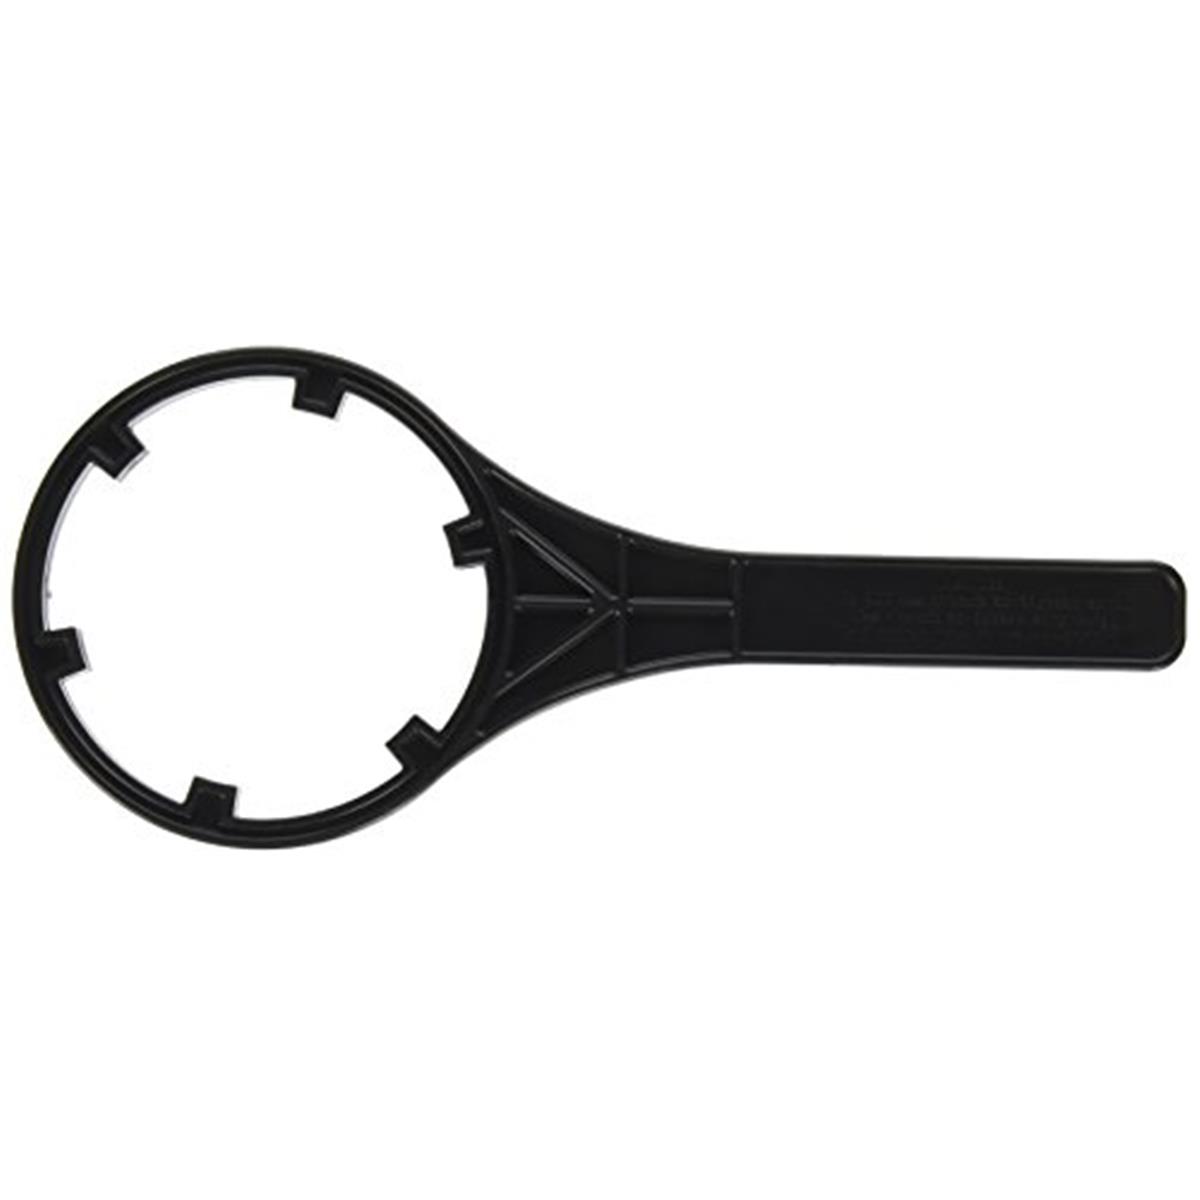 Pentek Water Filter Wrench Accessory